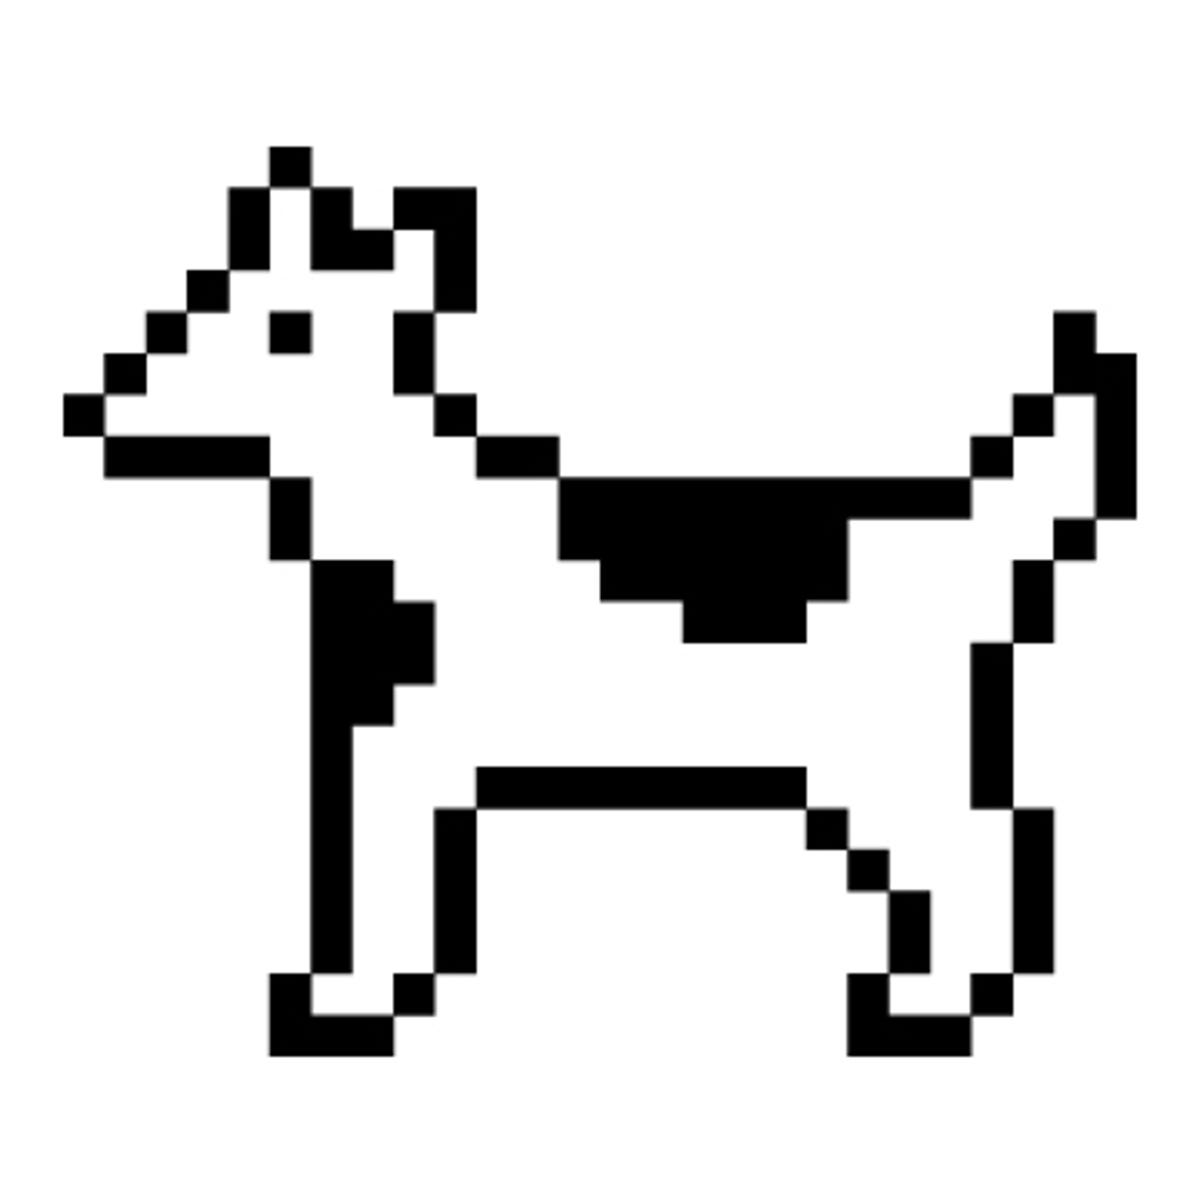 Spotted_dog_5x5.jpg